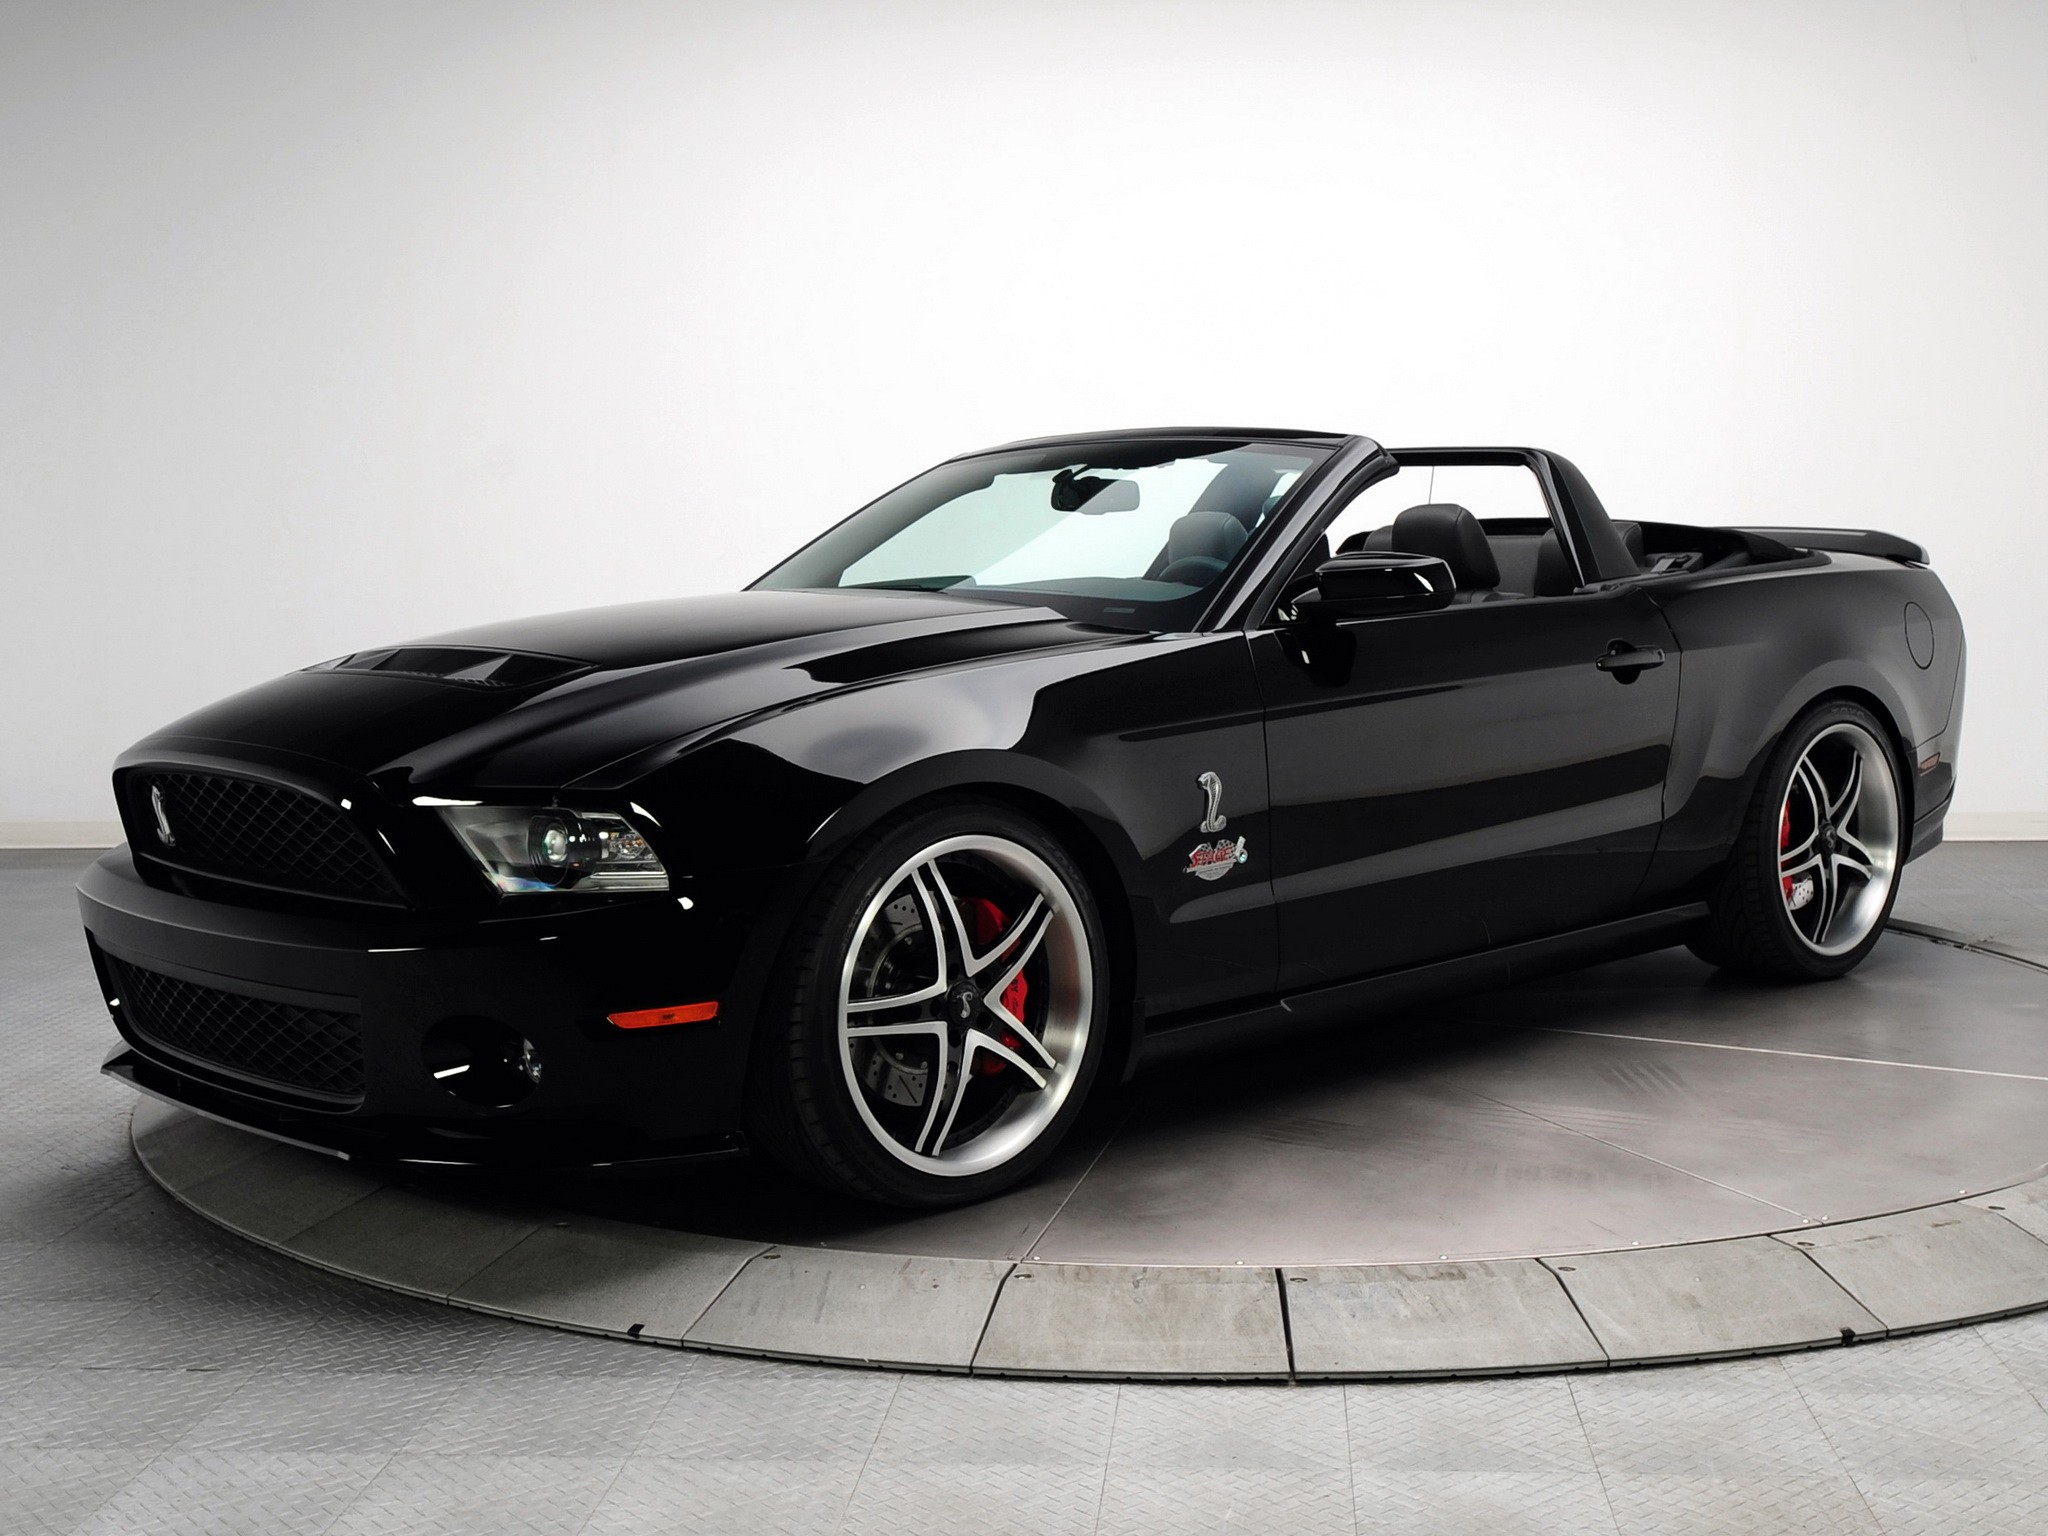 2012 Ford mustang shelby gt500 convertible #1